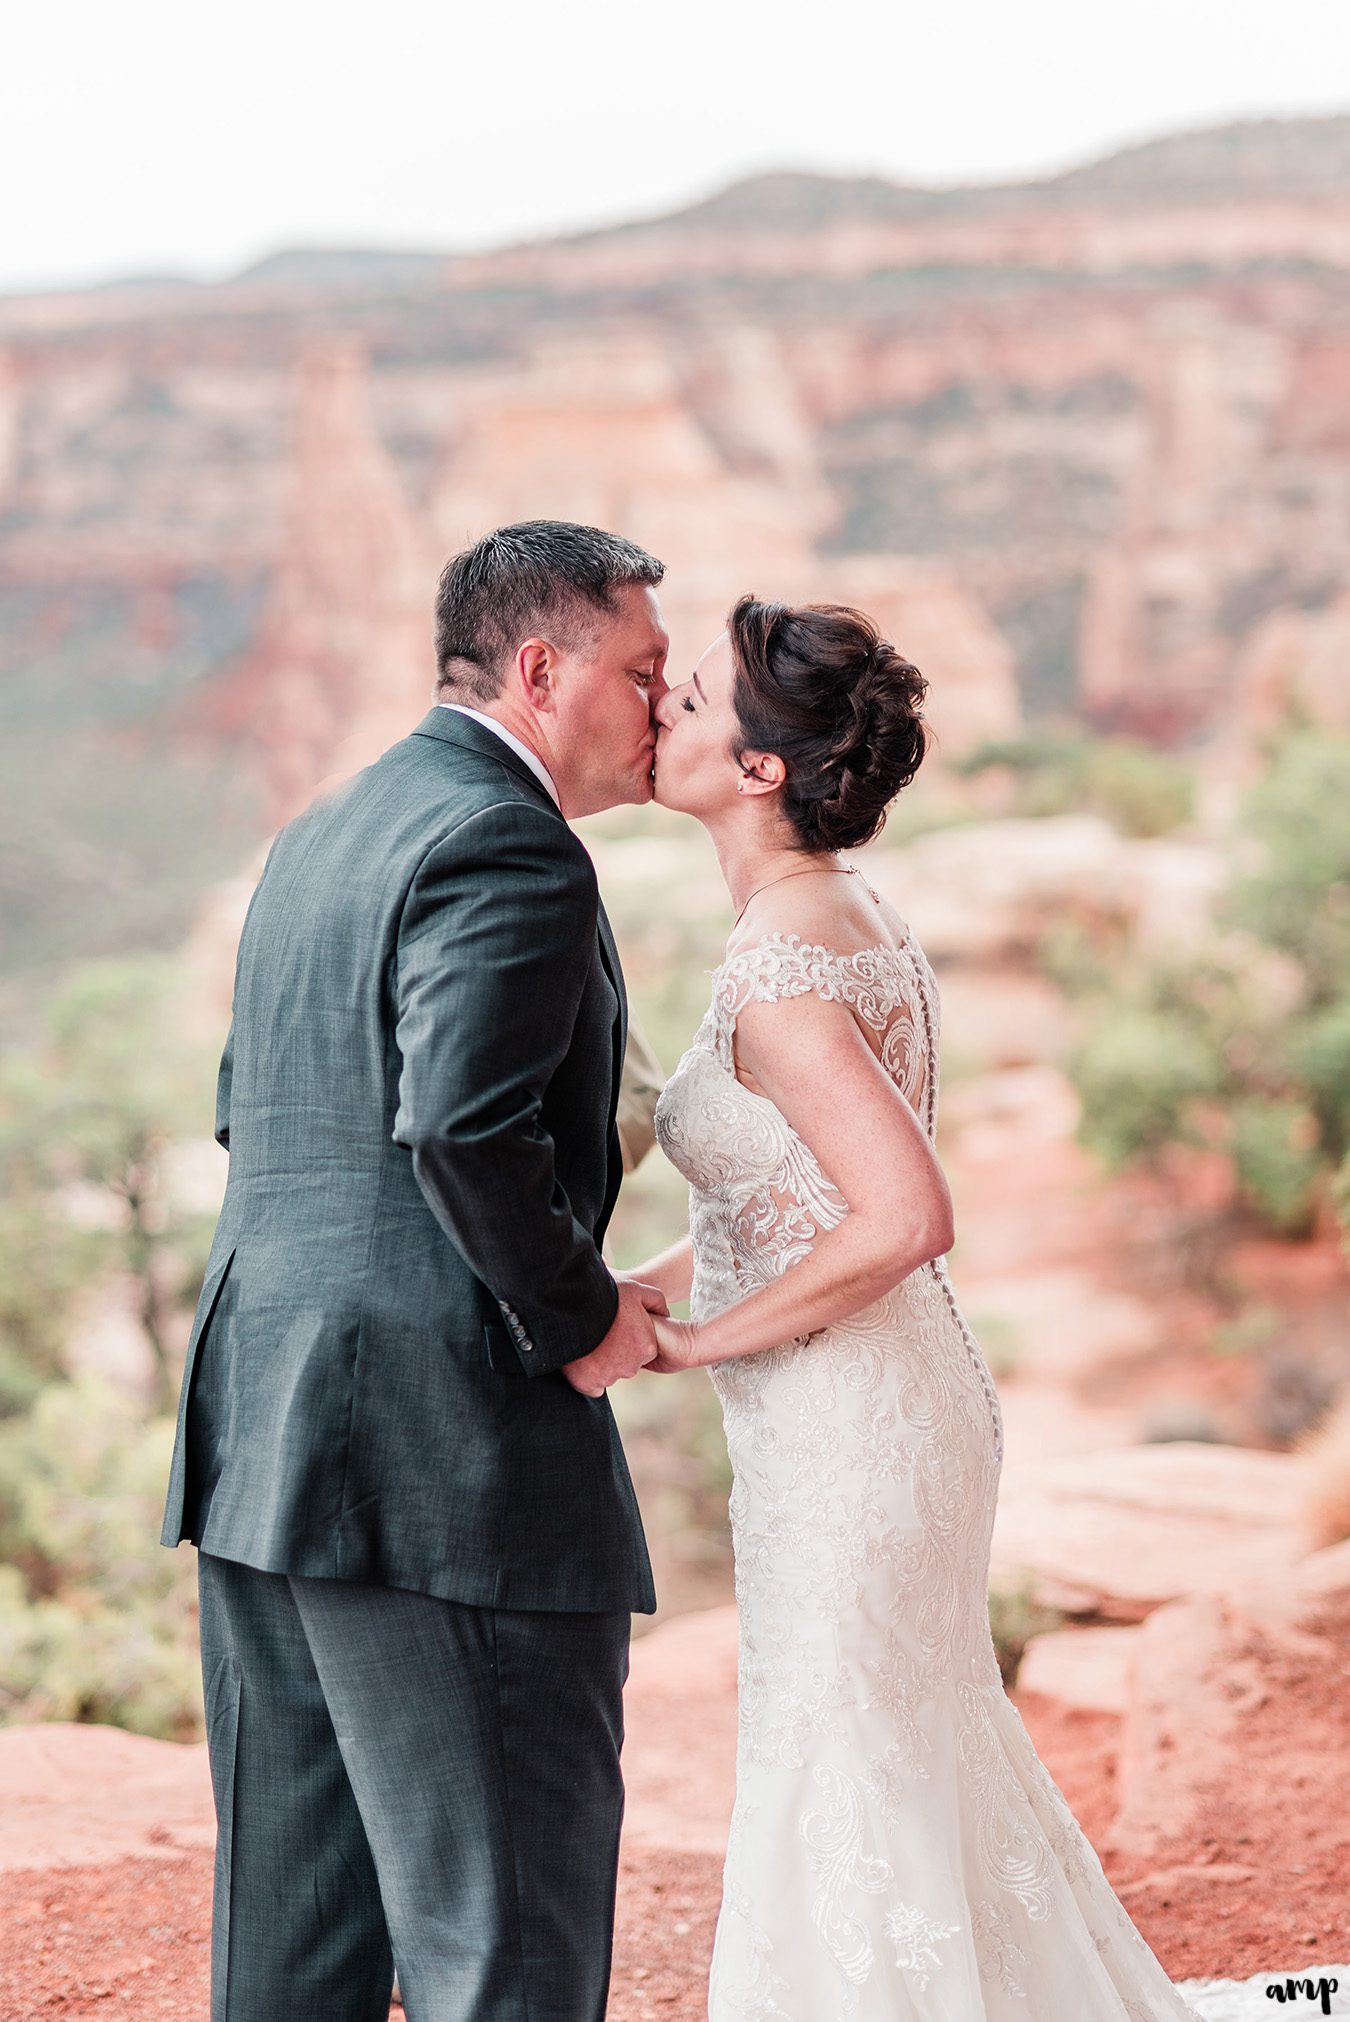 Newlyweds share their first kiss on the national monument in Grand Junction